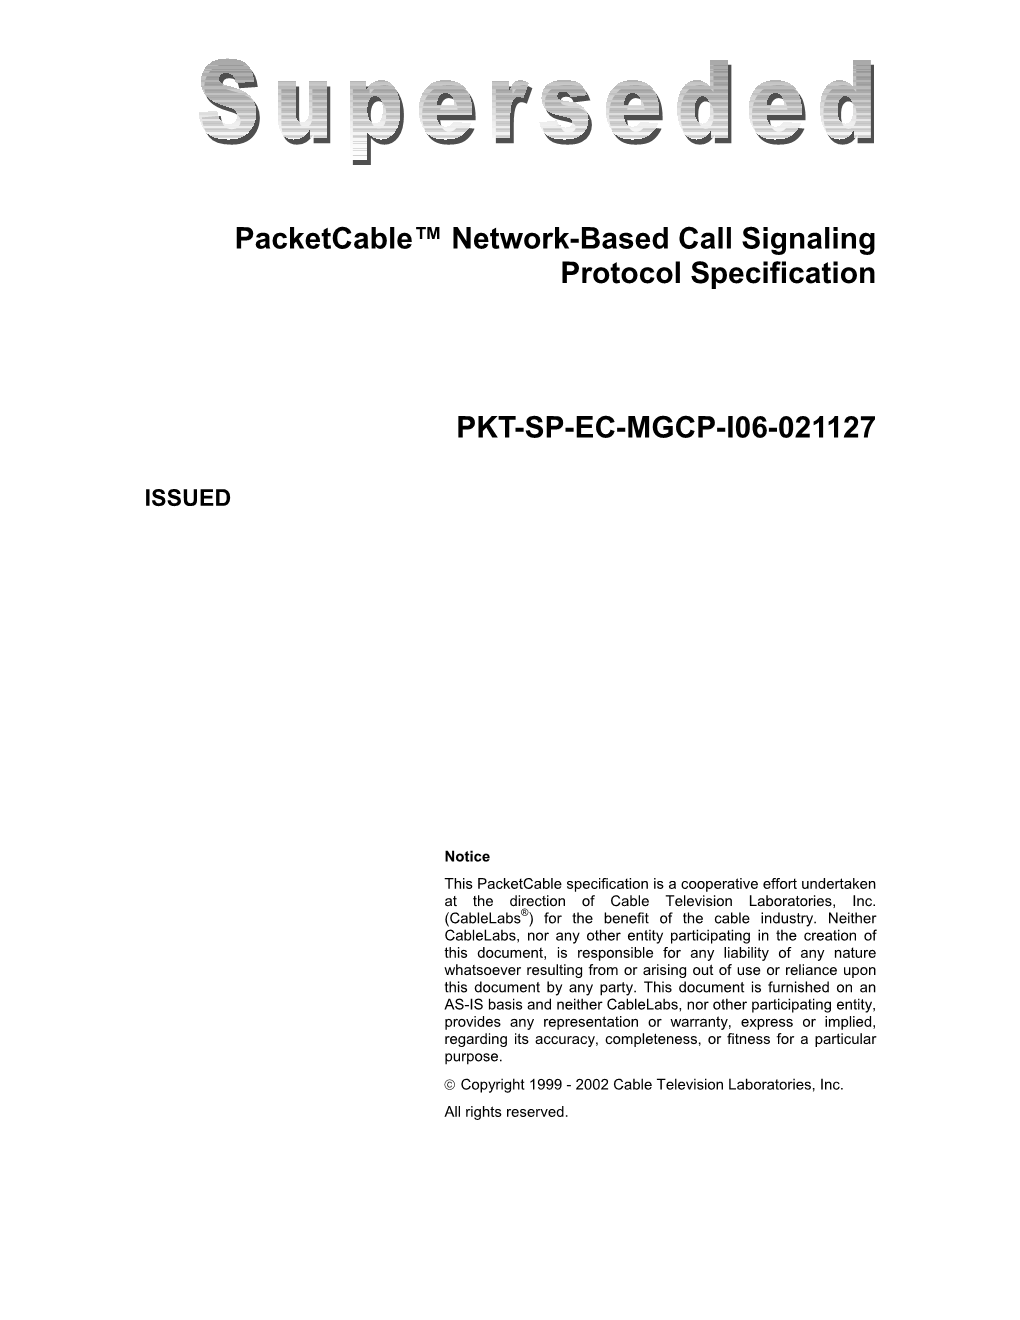 Packetcable™ Network-Based Call Signaling Protocol Specification